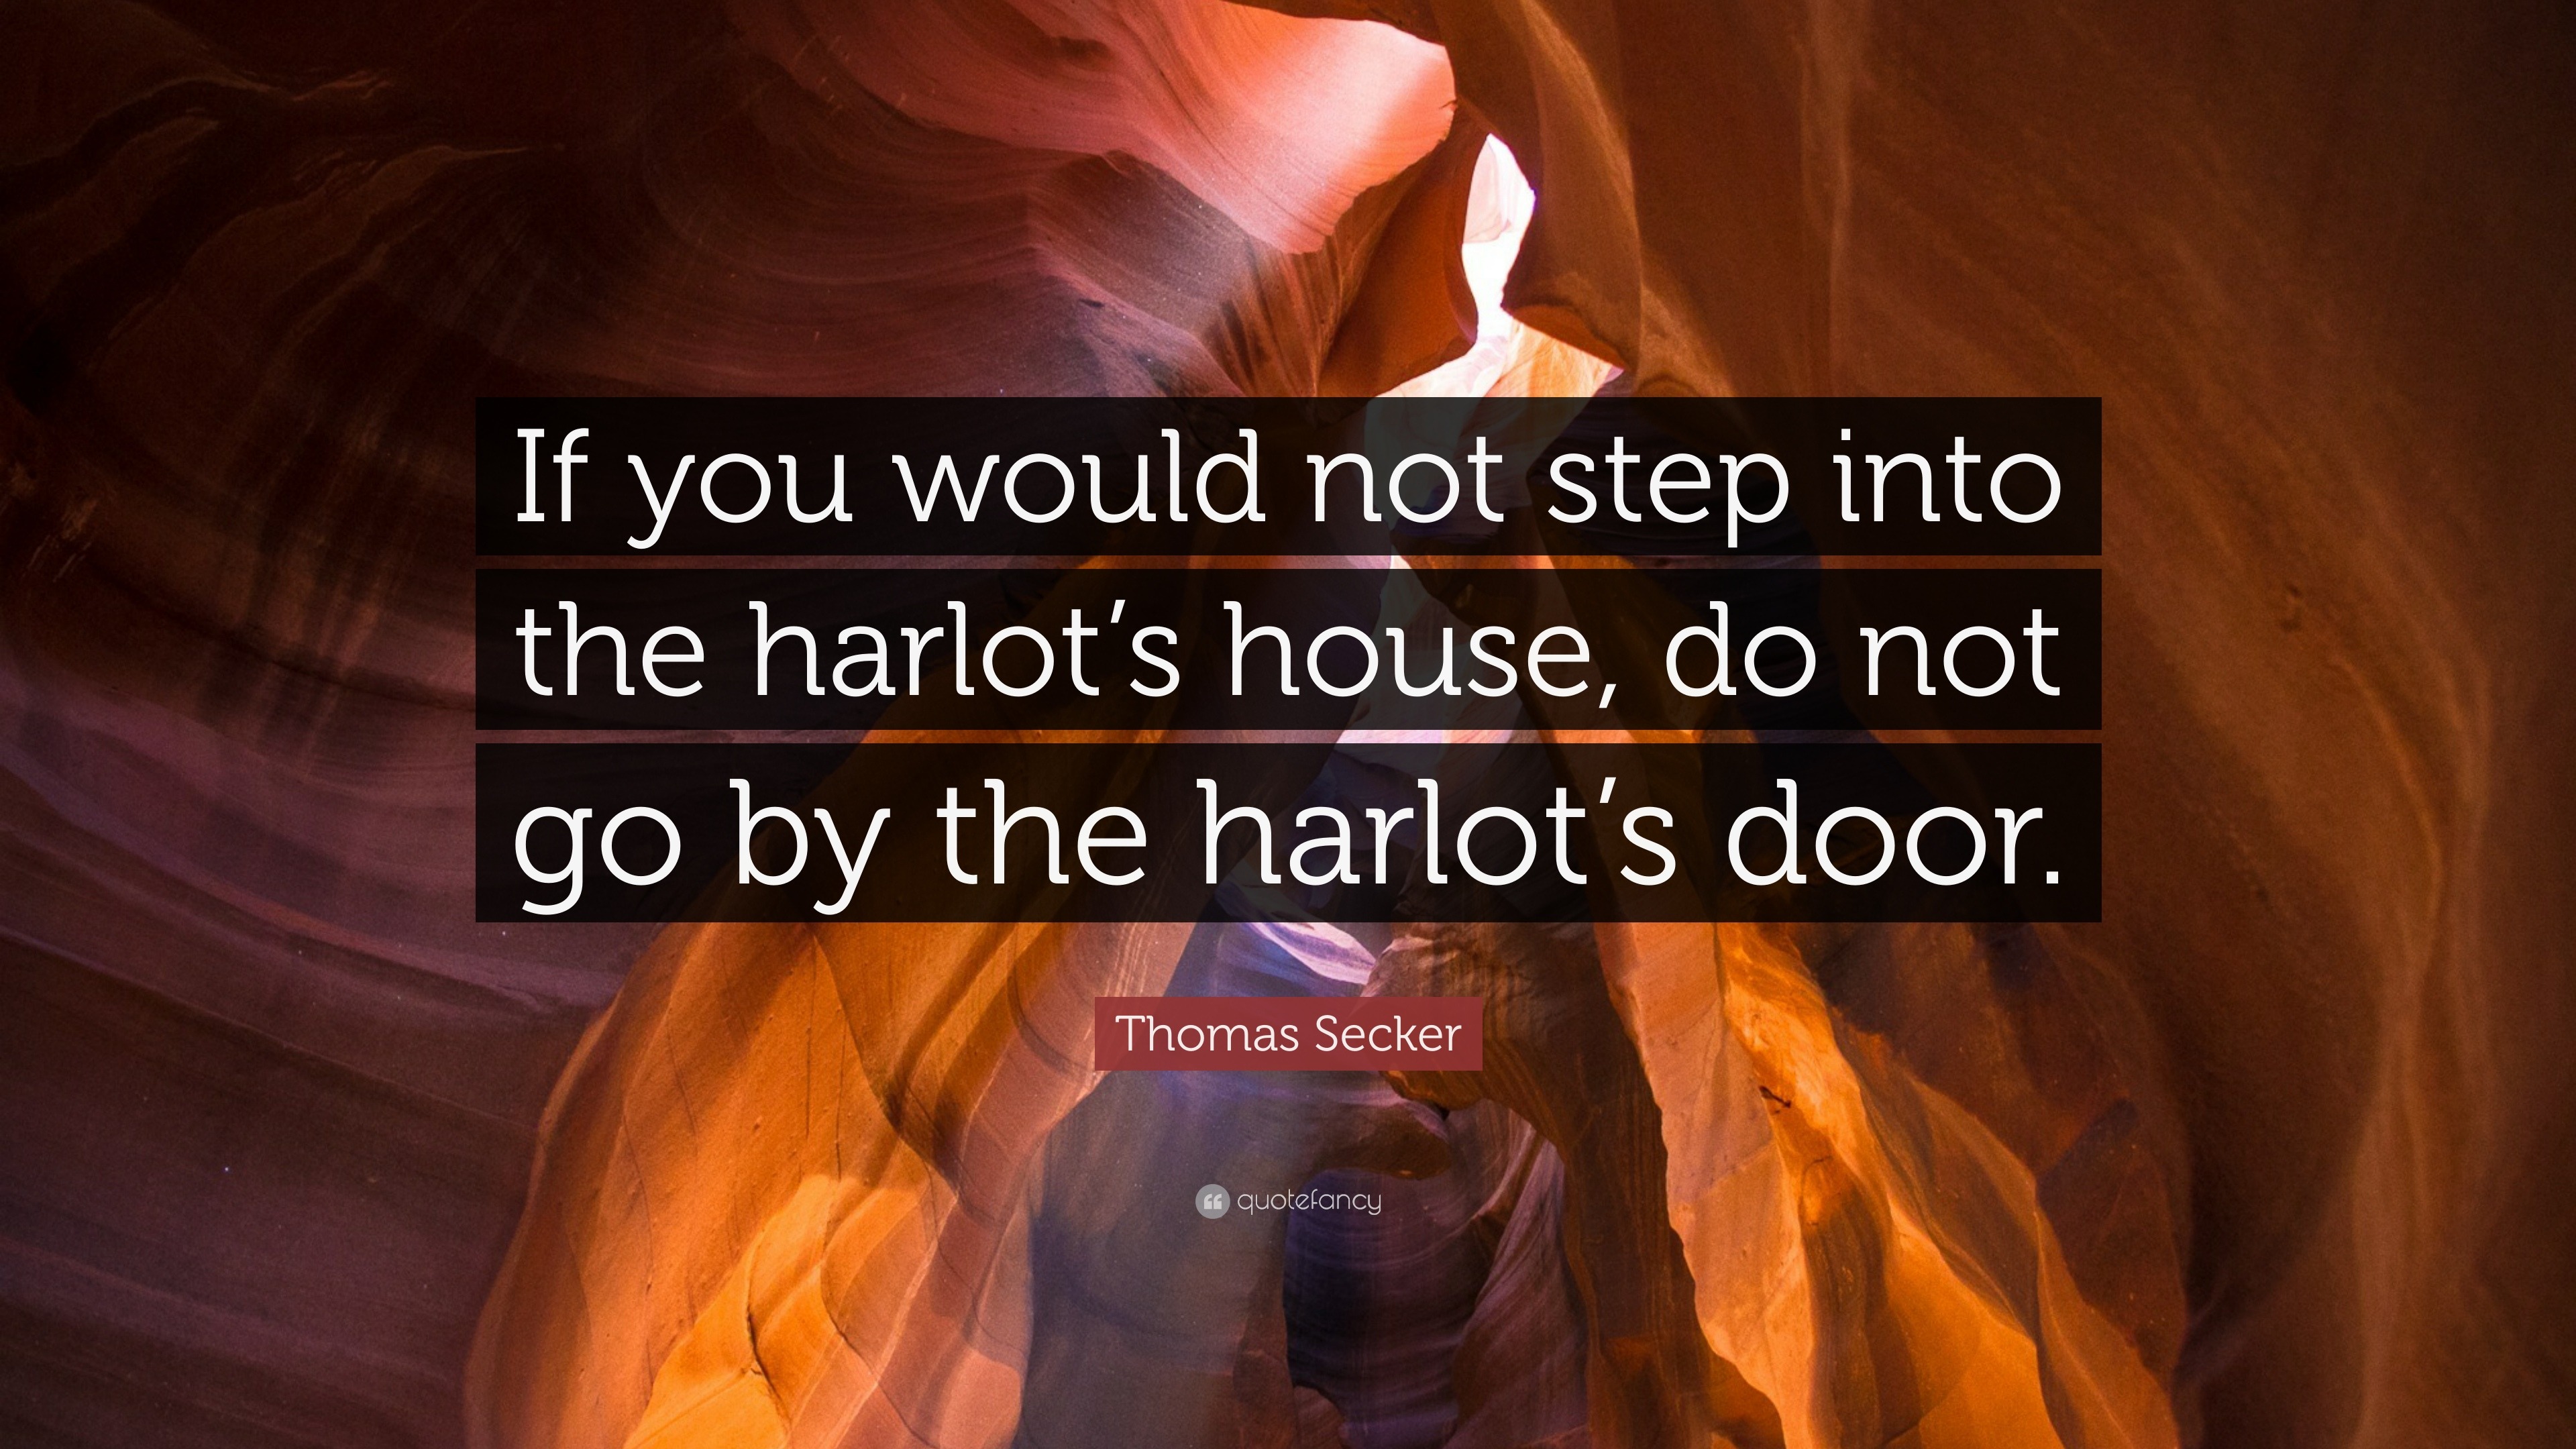 Thomas Secker Quote: “If you would not step into the harlot’s house, do ...